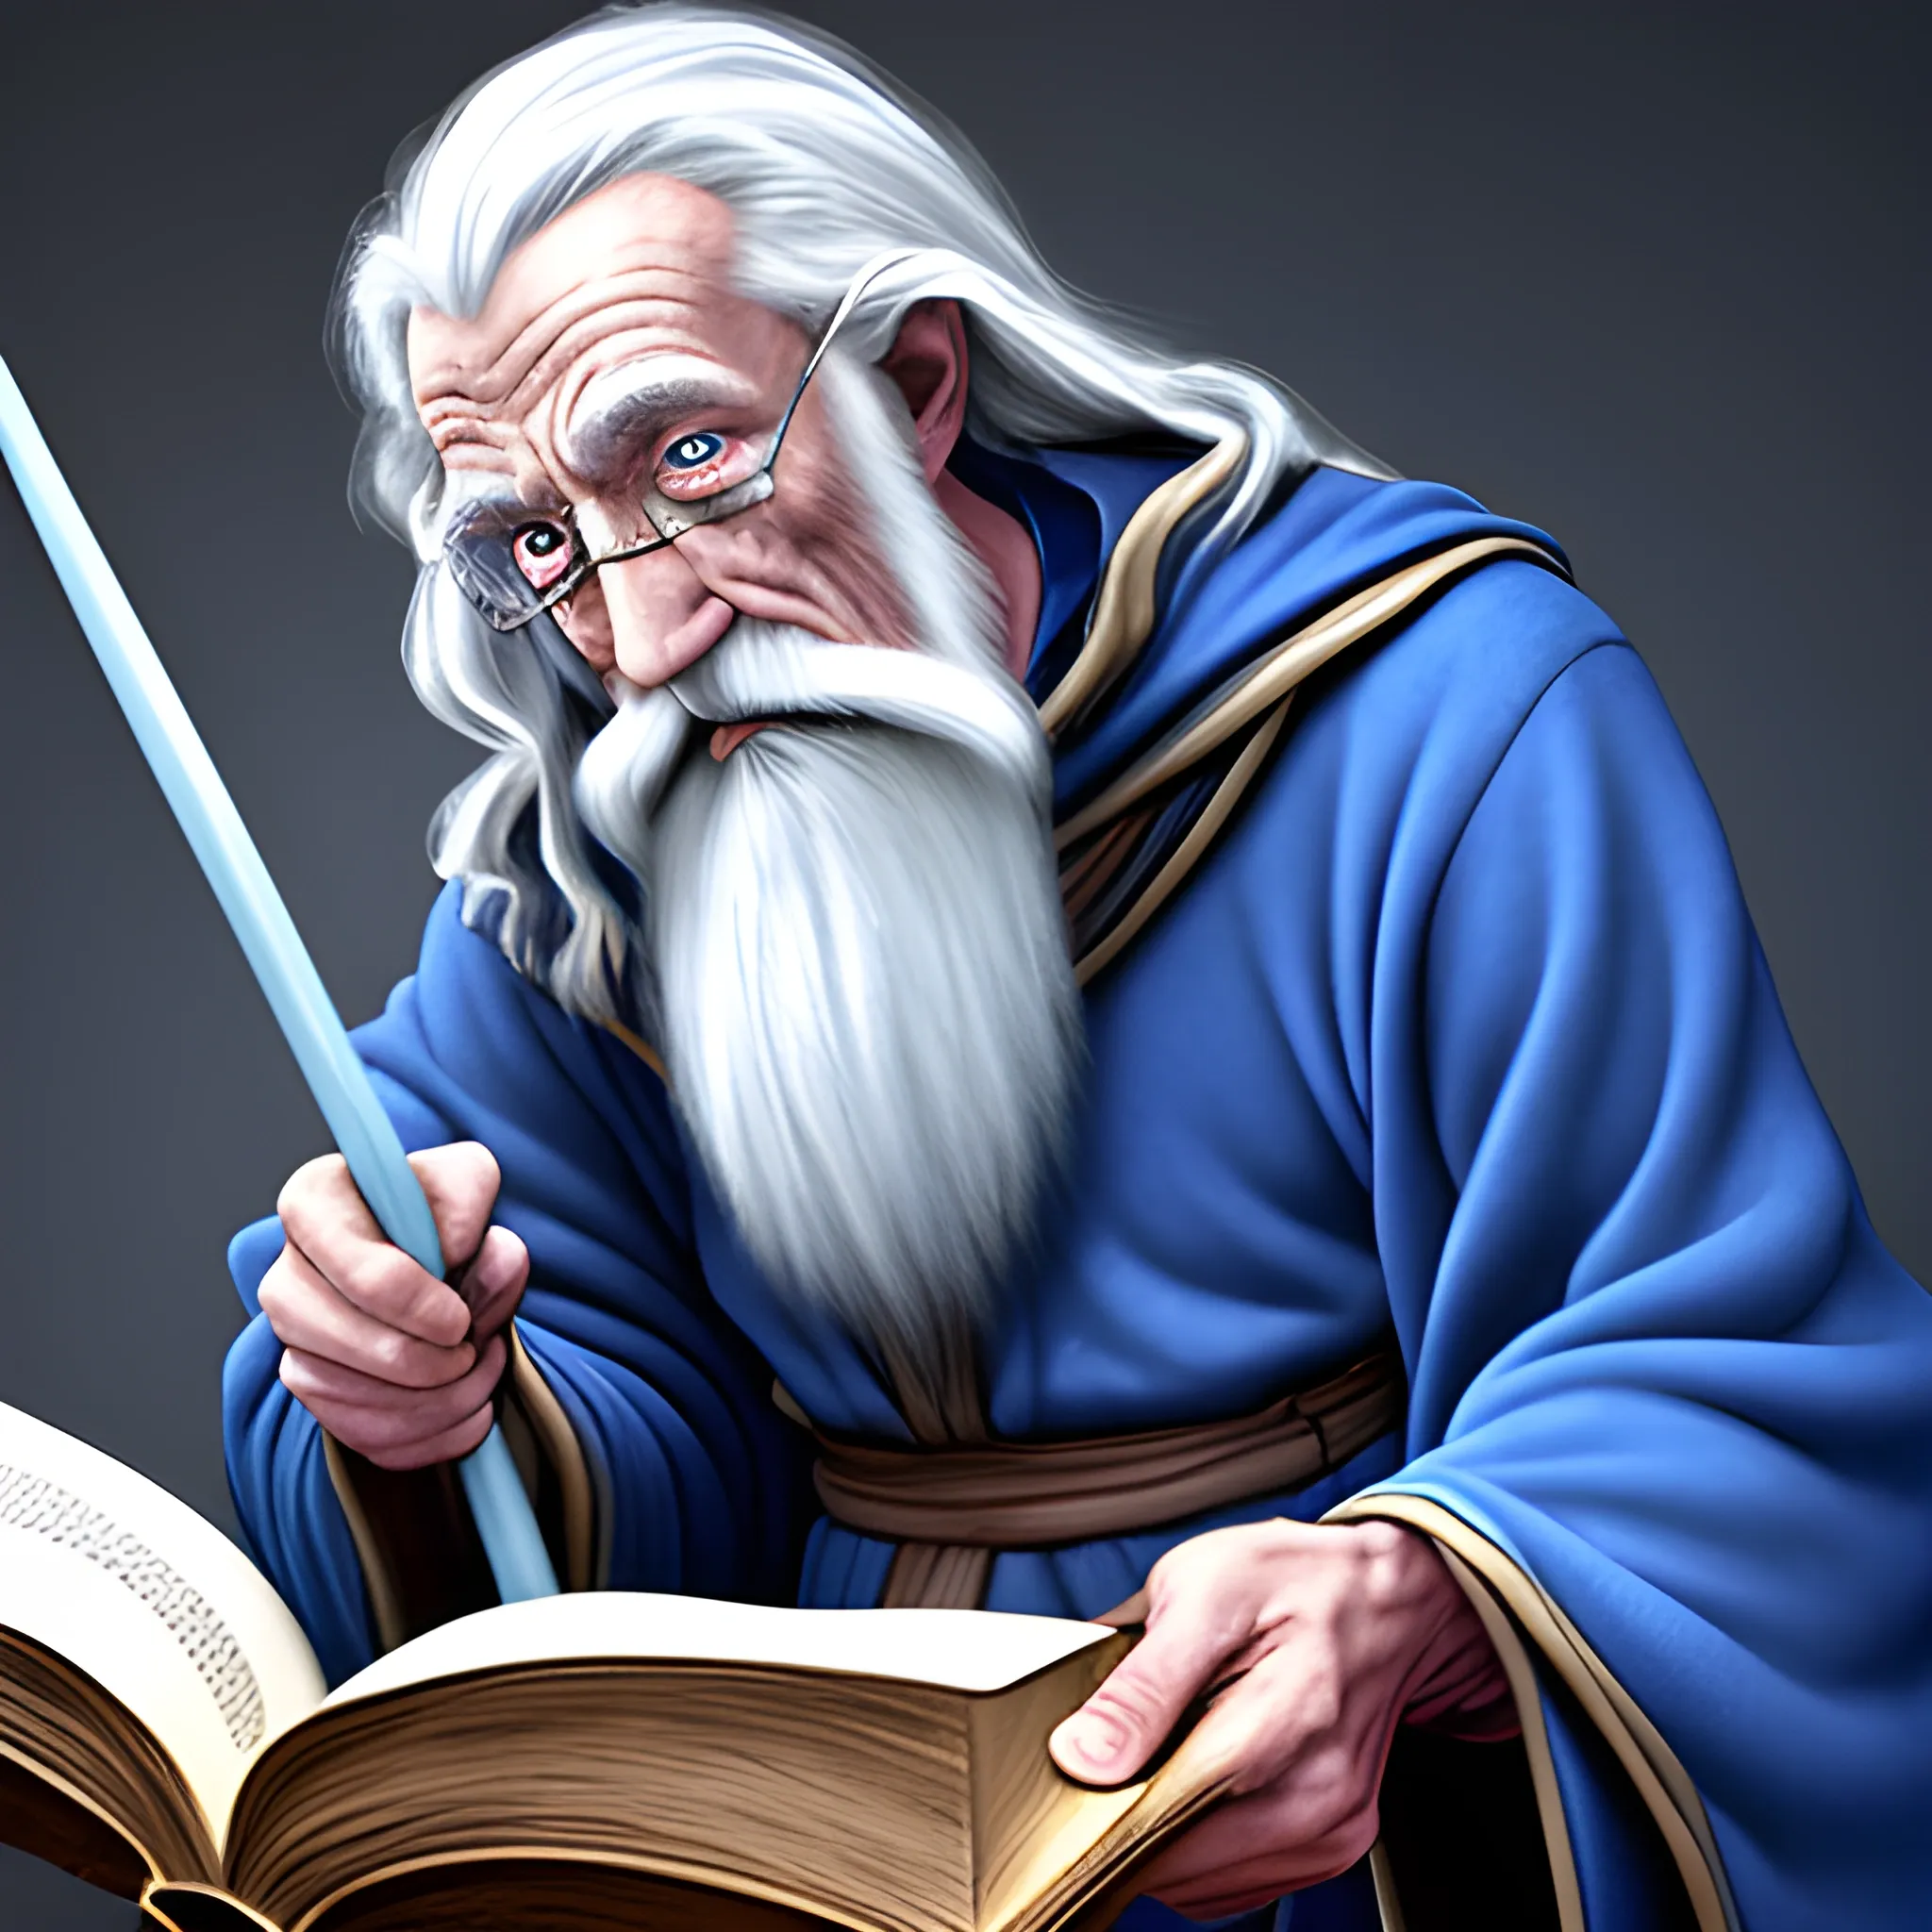 Old wizard with a Staff on Hand. He Has a book in second Hand. He Has blue robe. He Has white Heard. Fantasy, Cartoon